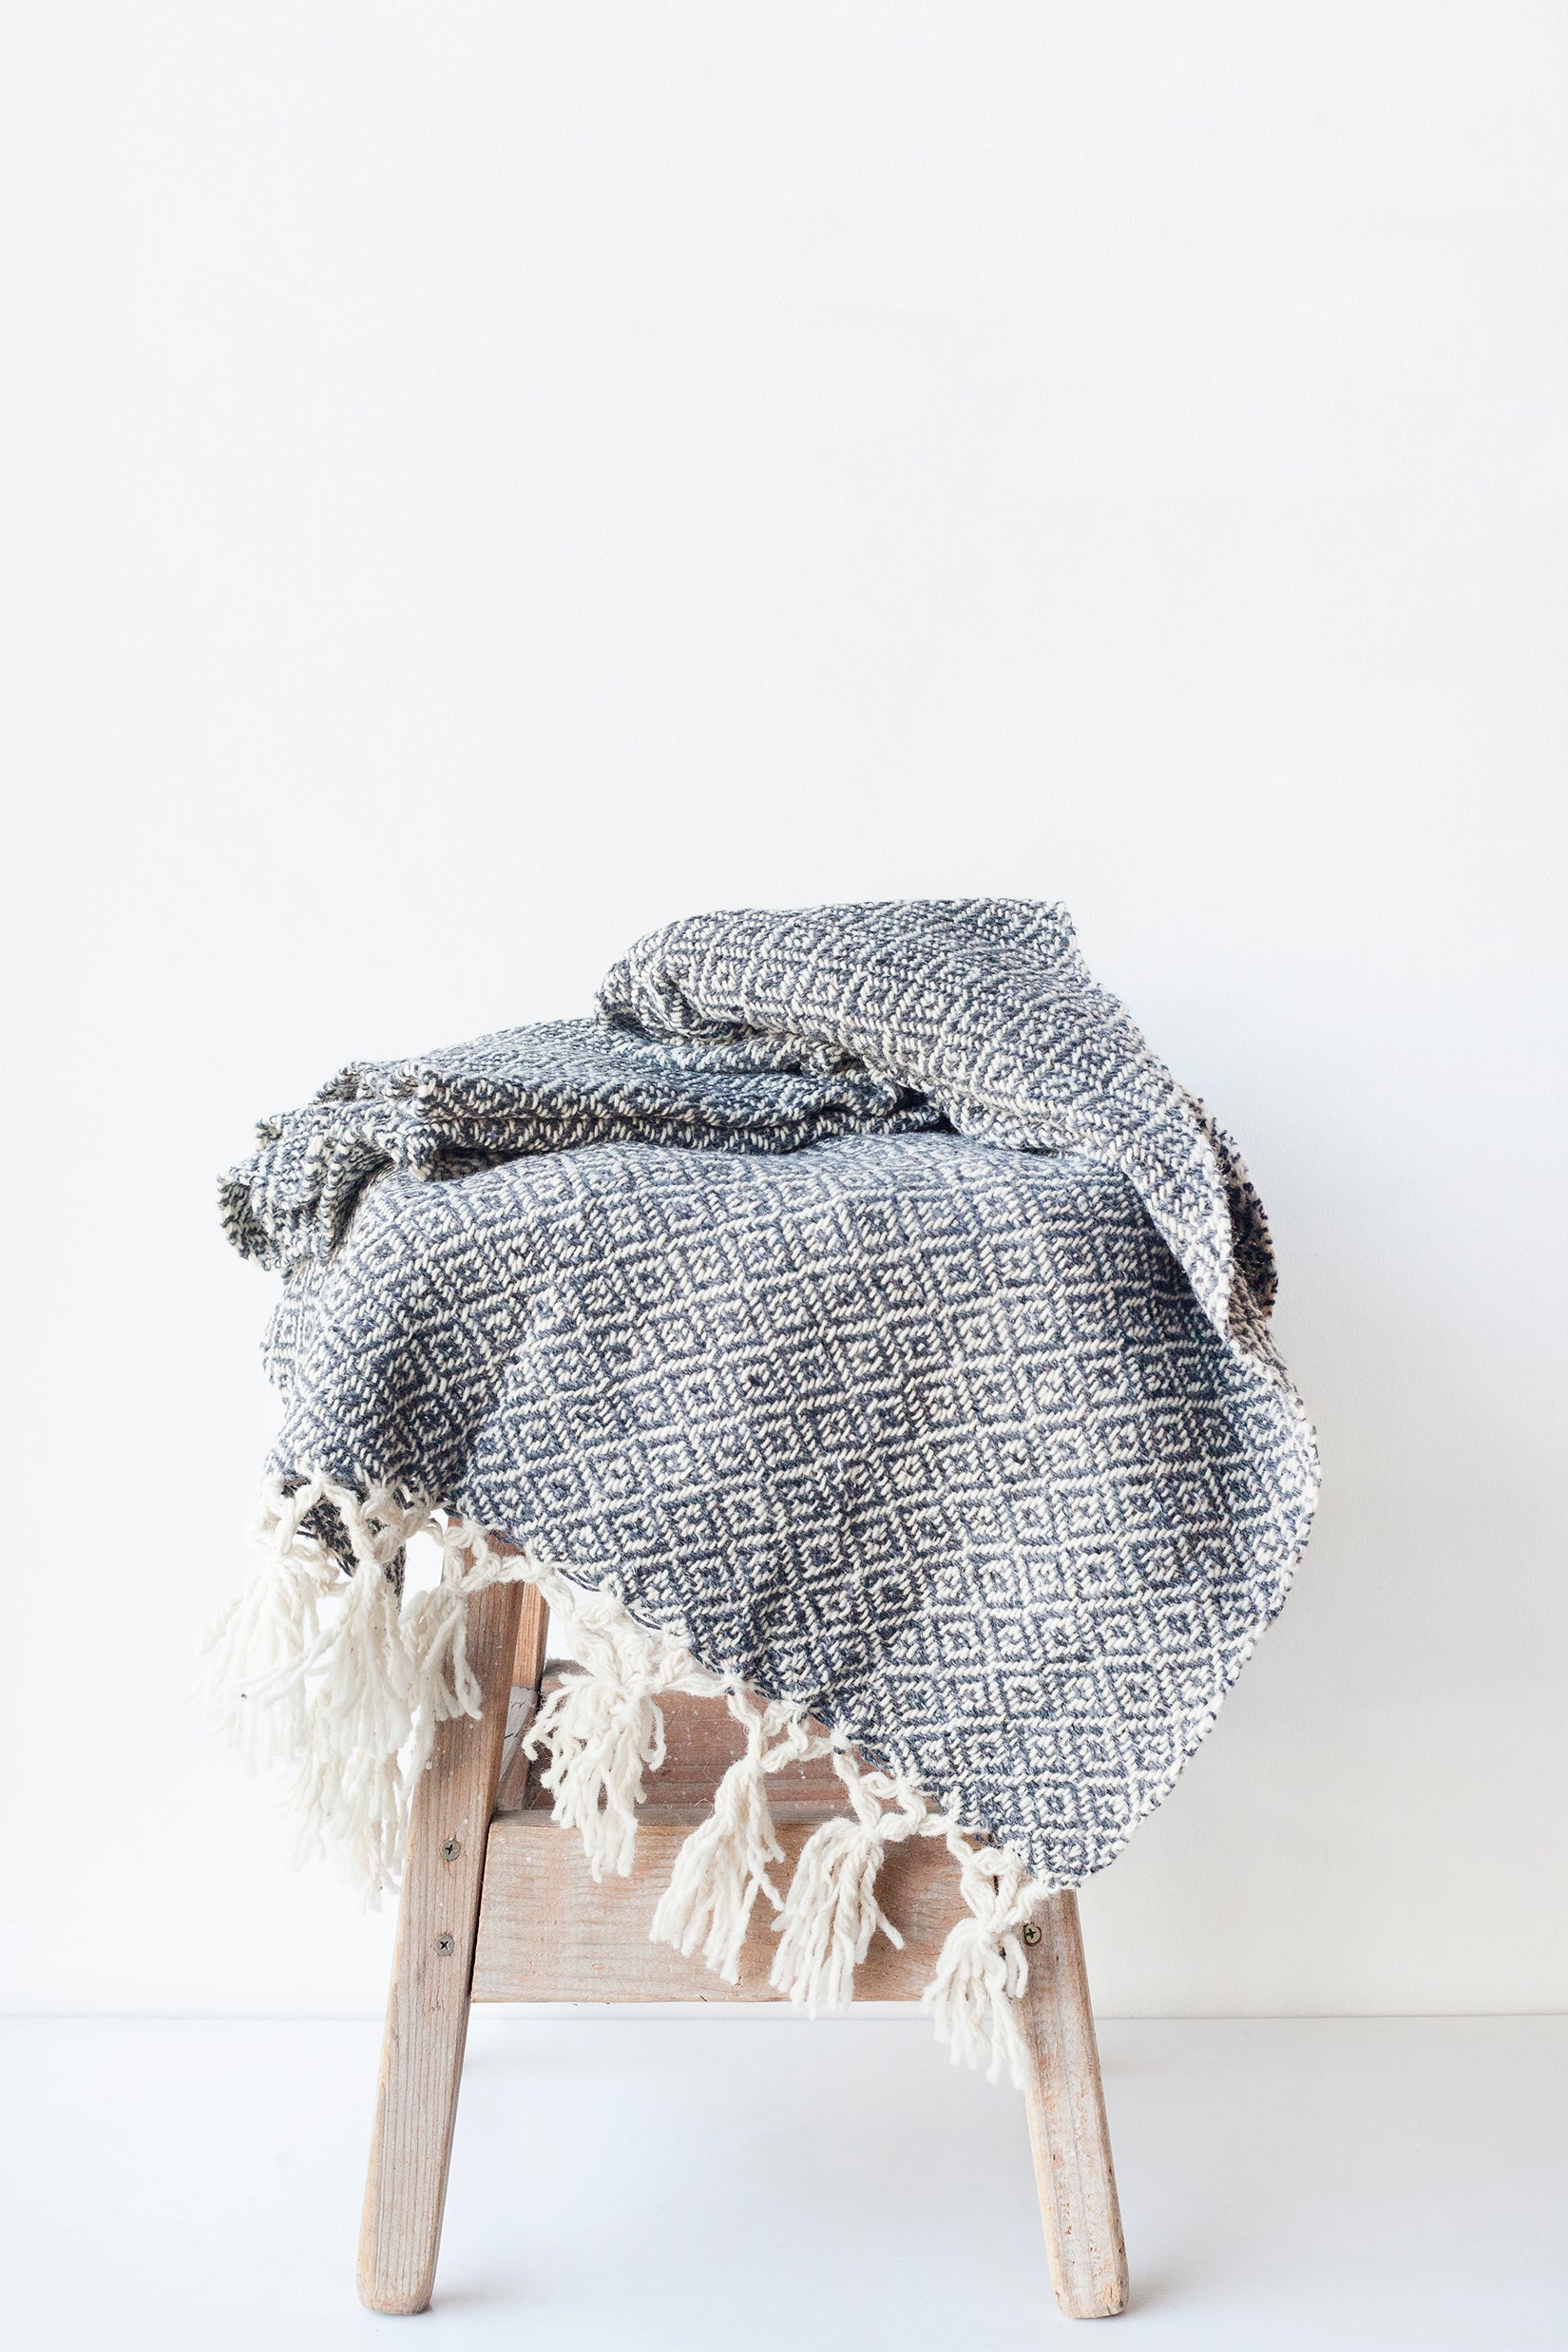 Charcoal grey and white wool throw blanket woven in a diamond pattern with tied tassels at each end draped over a wood stool